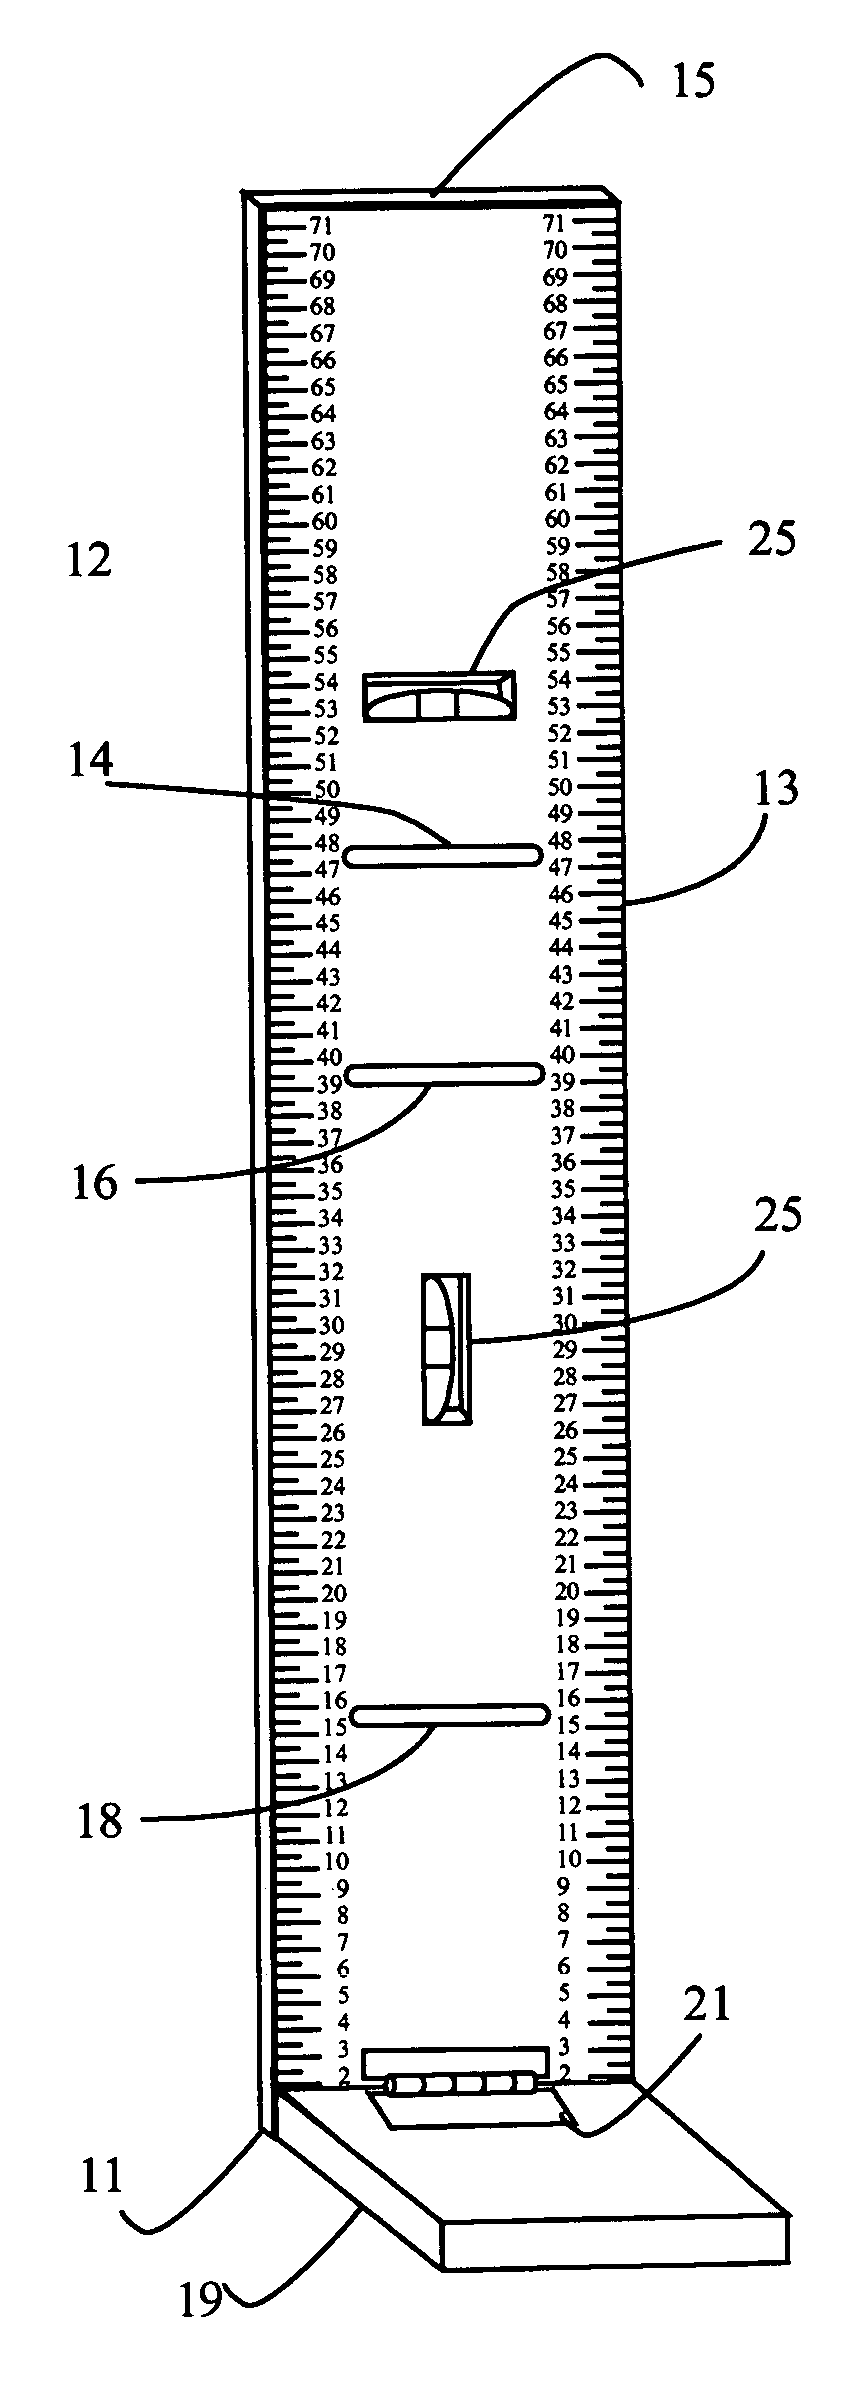 Electrician's measurement apparatus and method of use